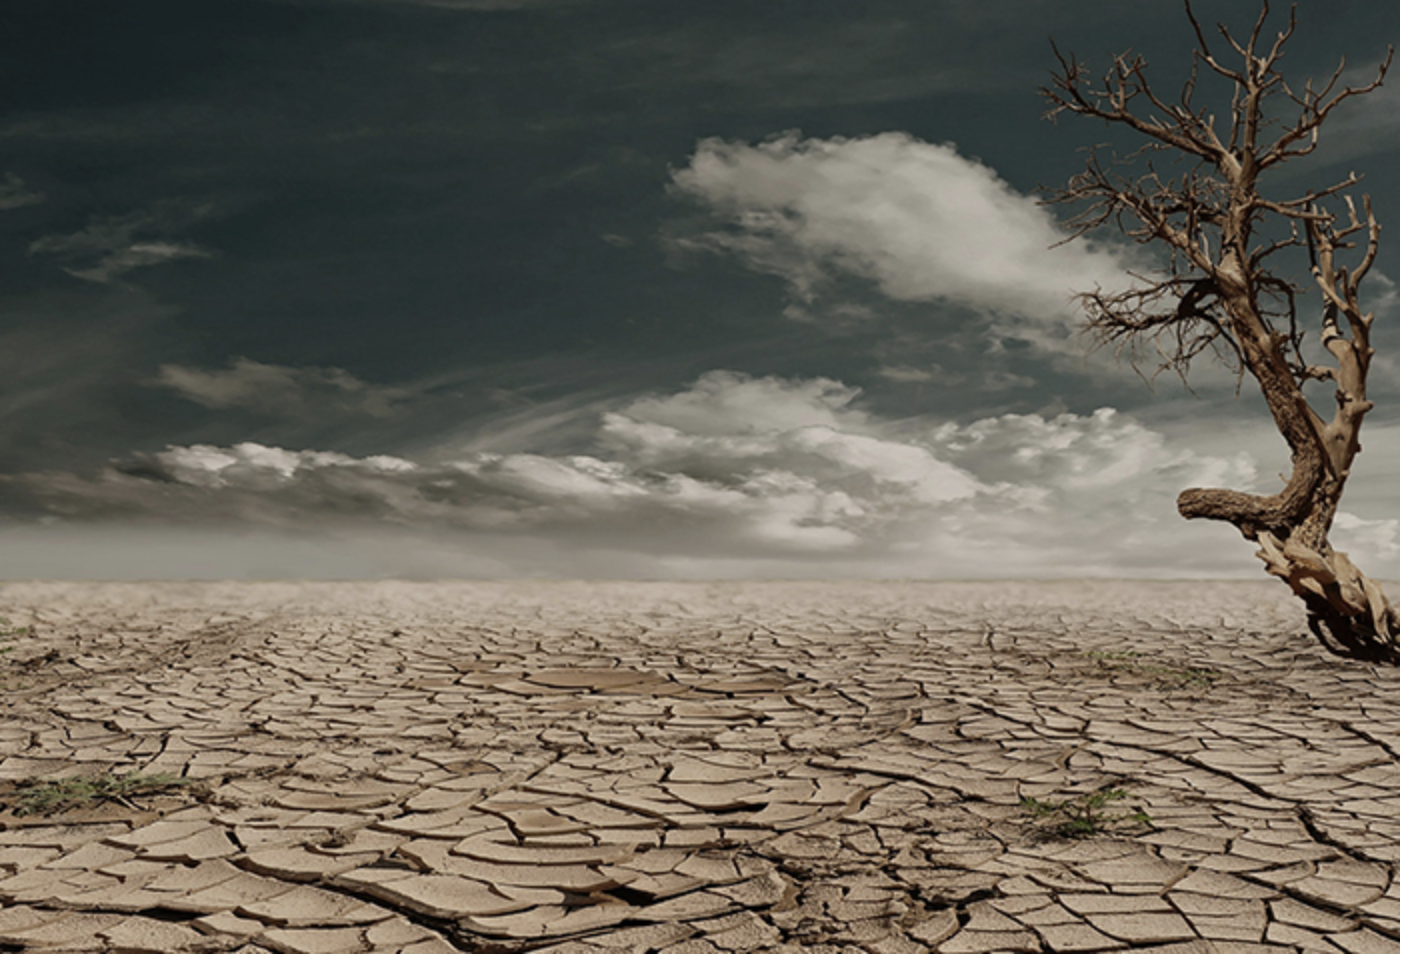 Dry and barren landscape